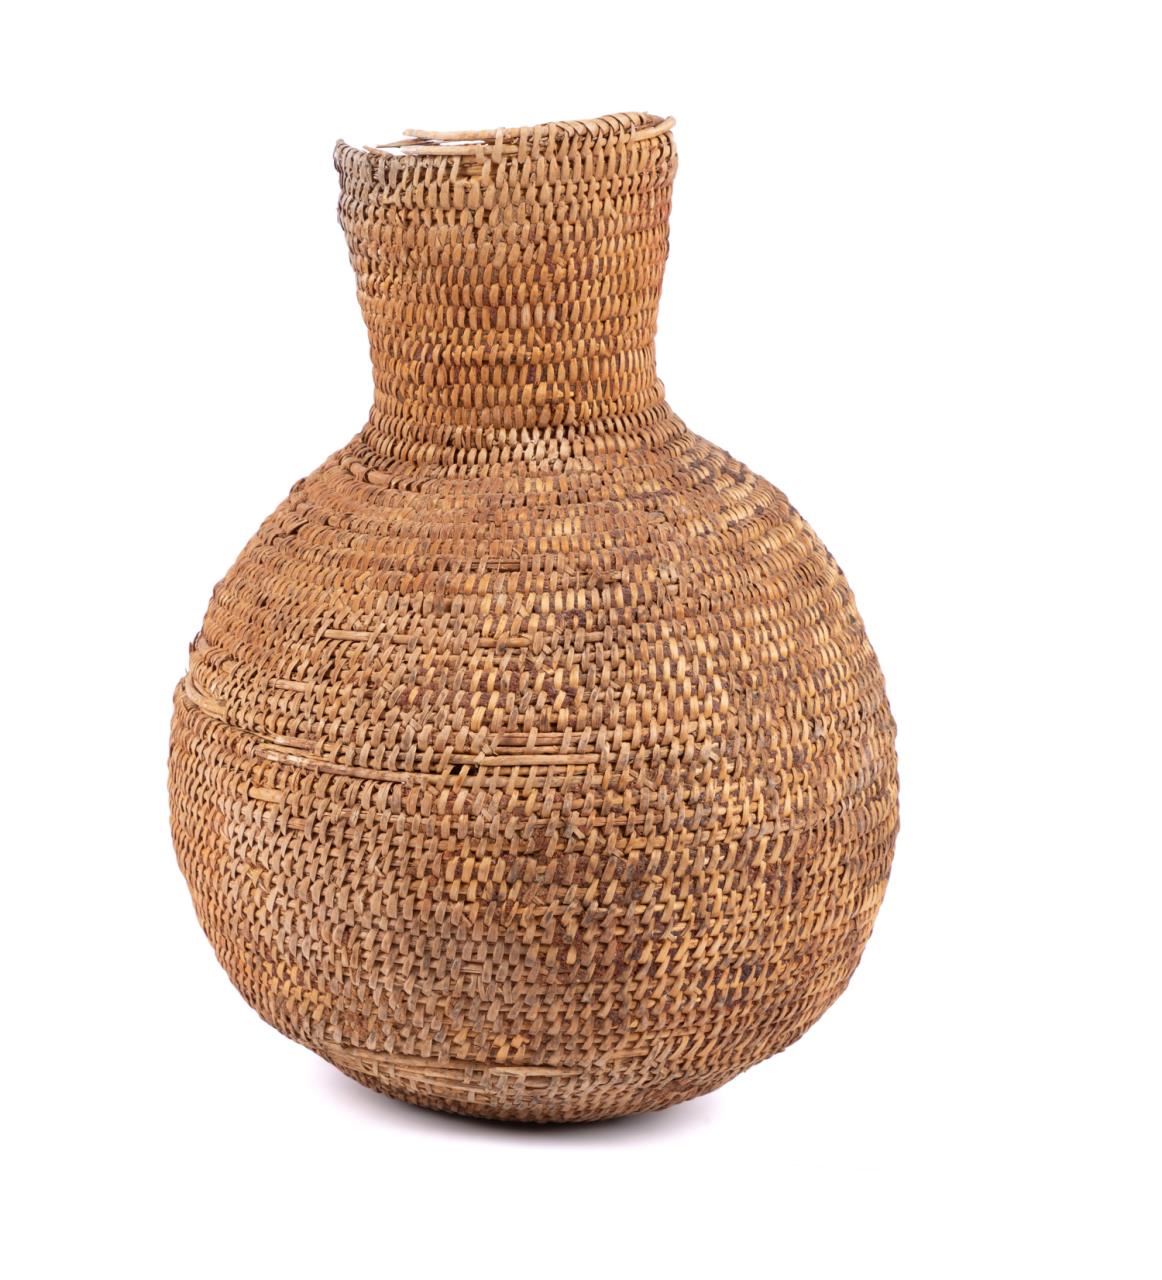 APACHE COILED BASKETRY WATER JUG,